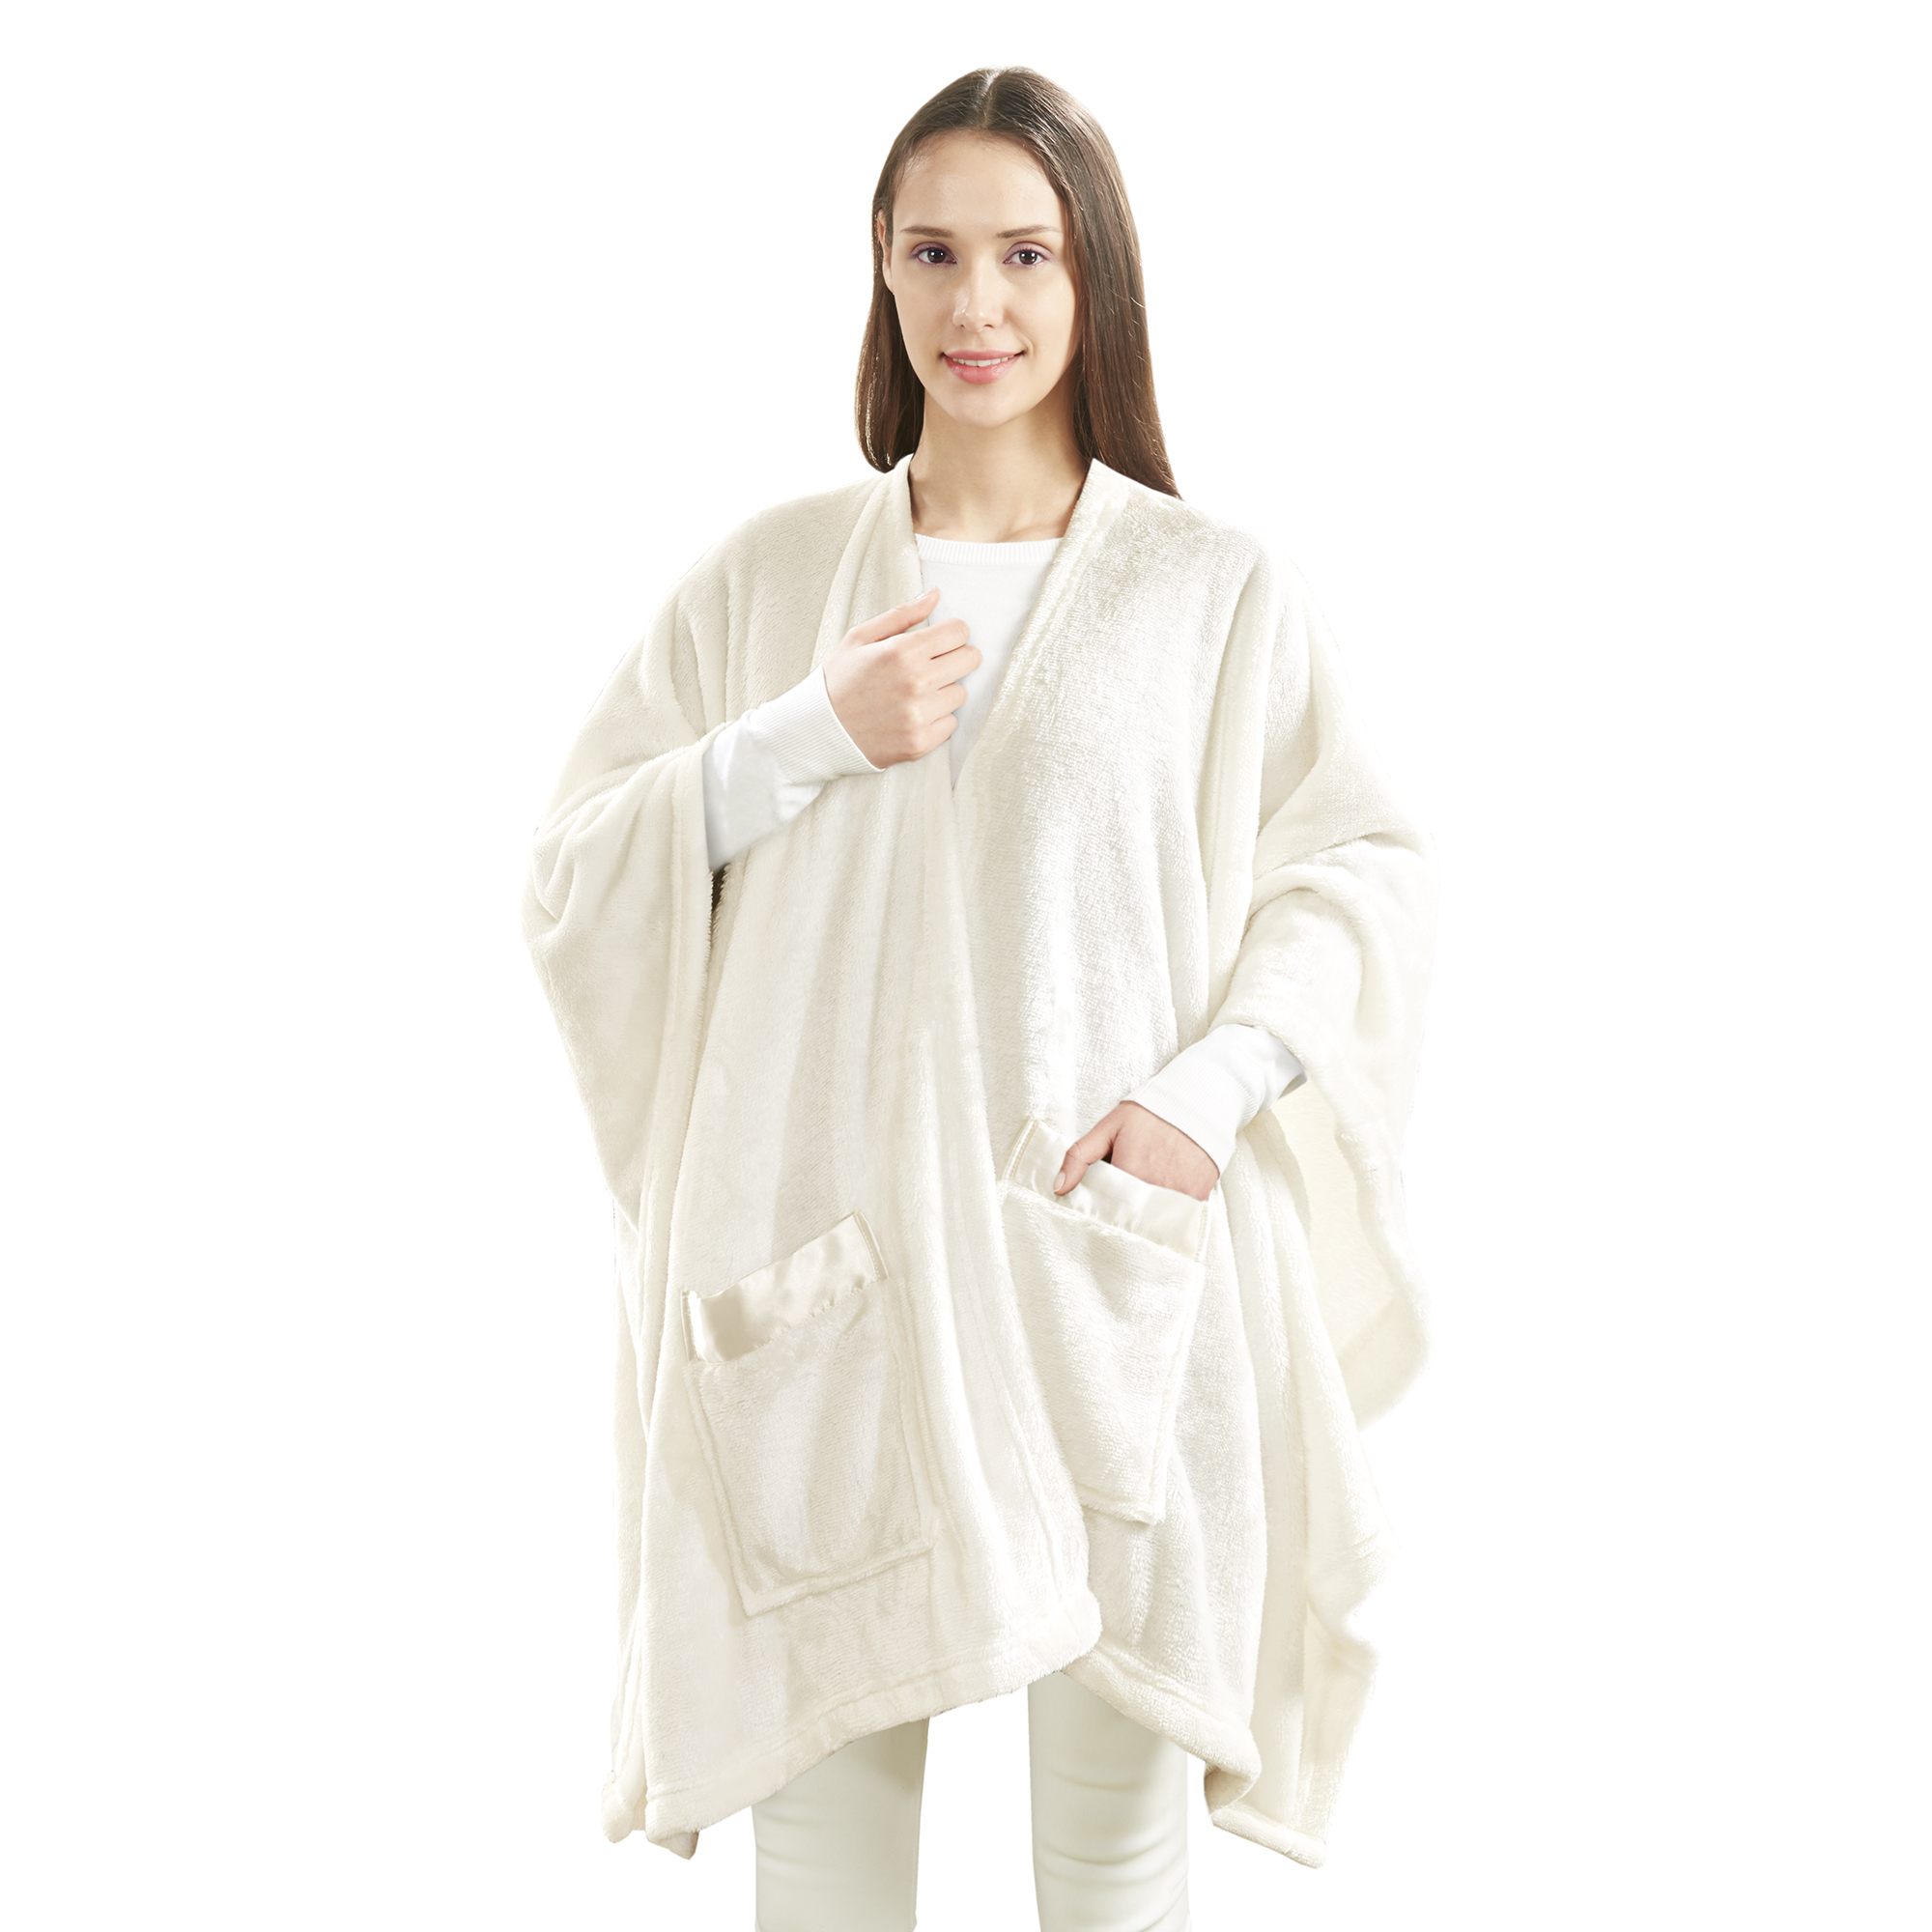 Giftable and Wearable Angel Wrap Plush Throw Blanket with Pockets, Cream - image 4 of 5